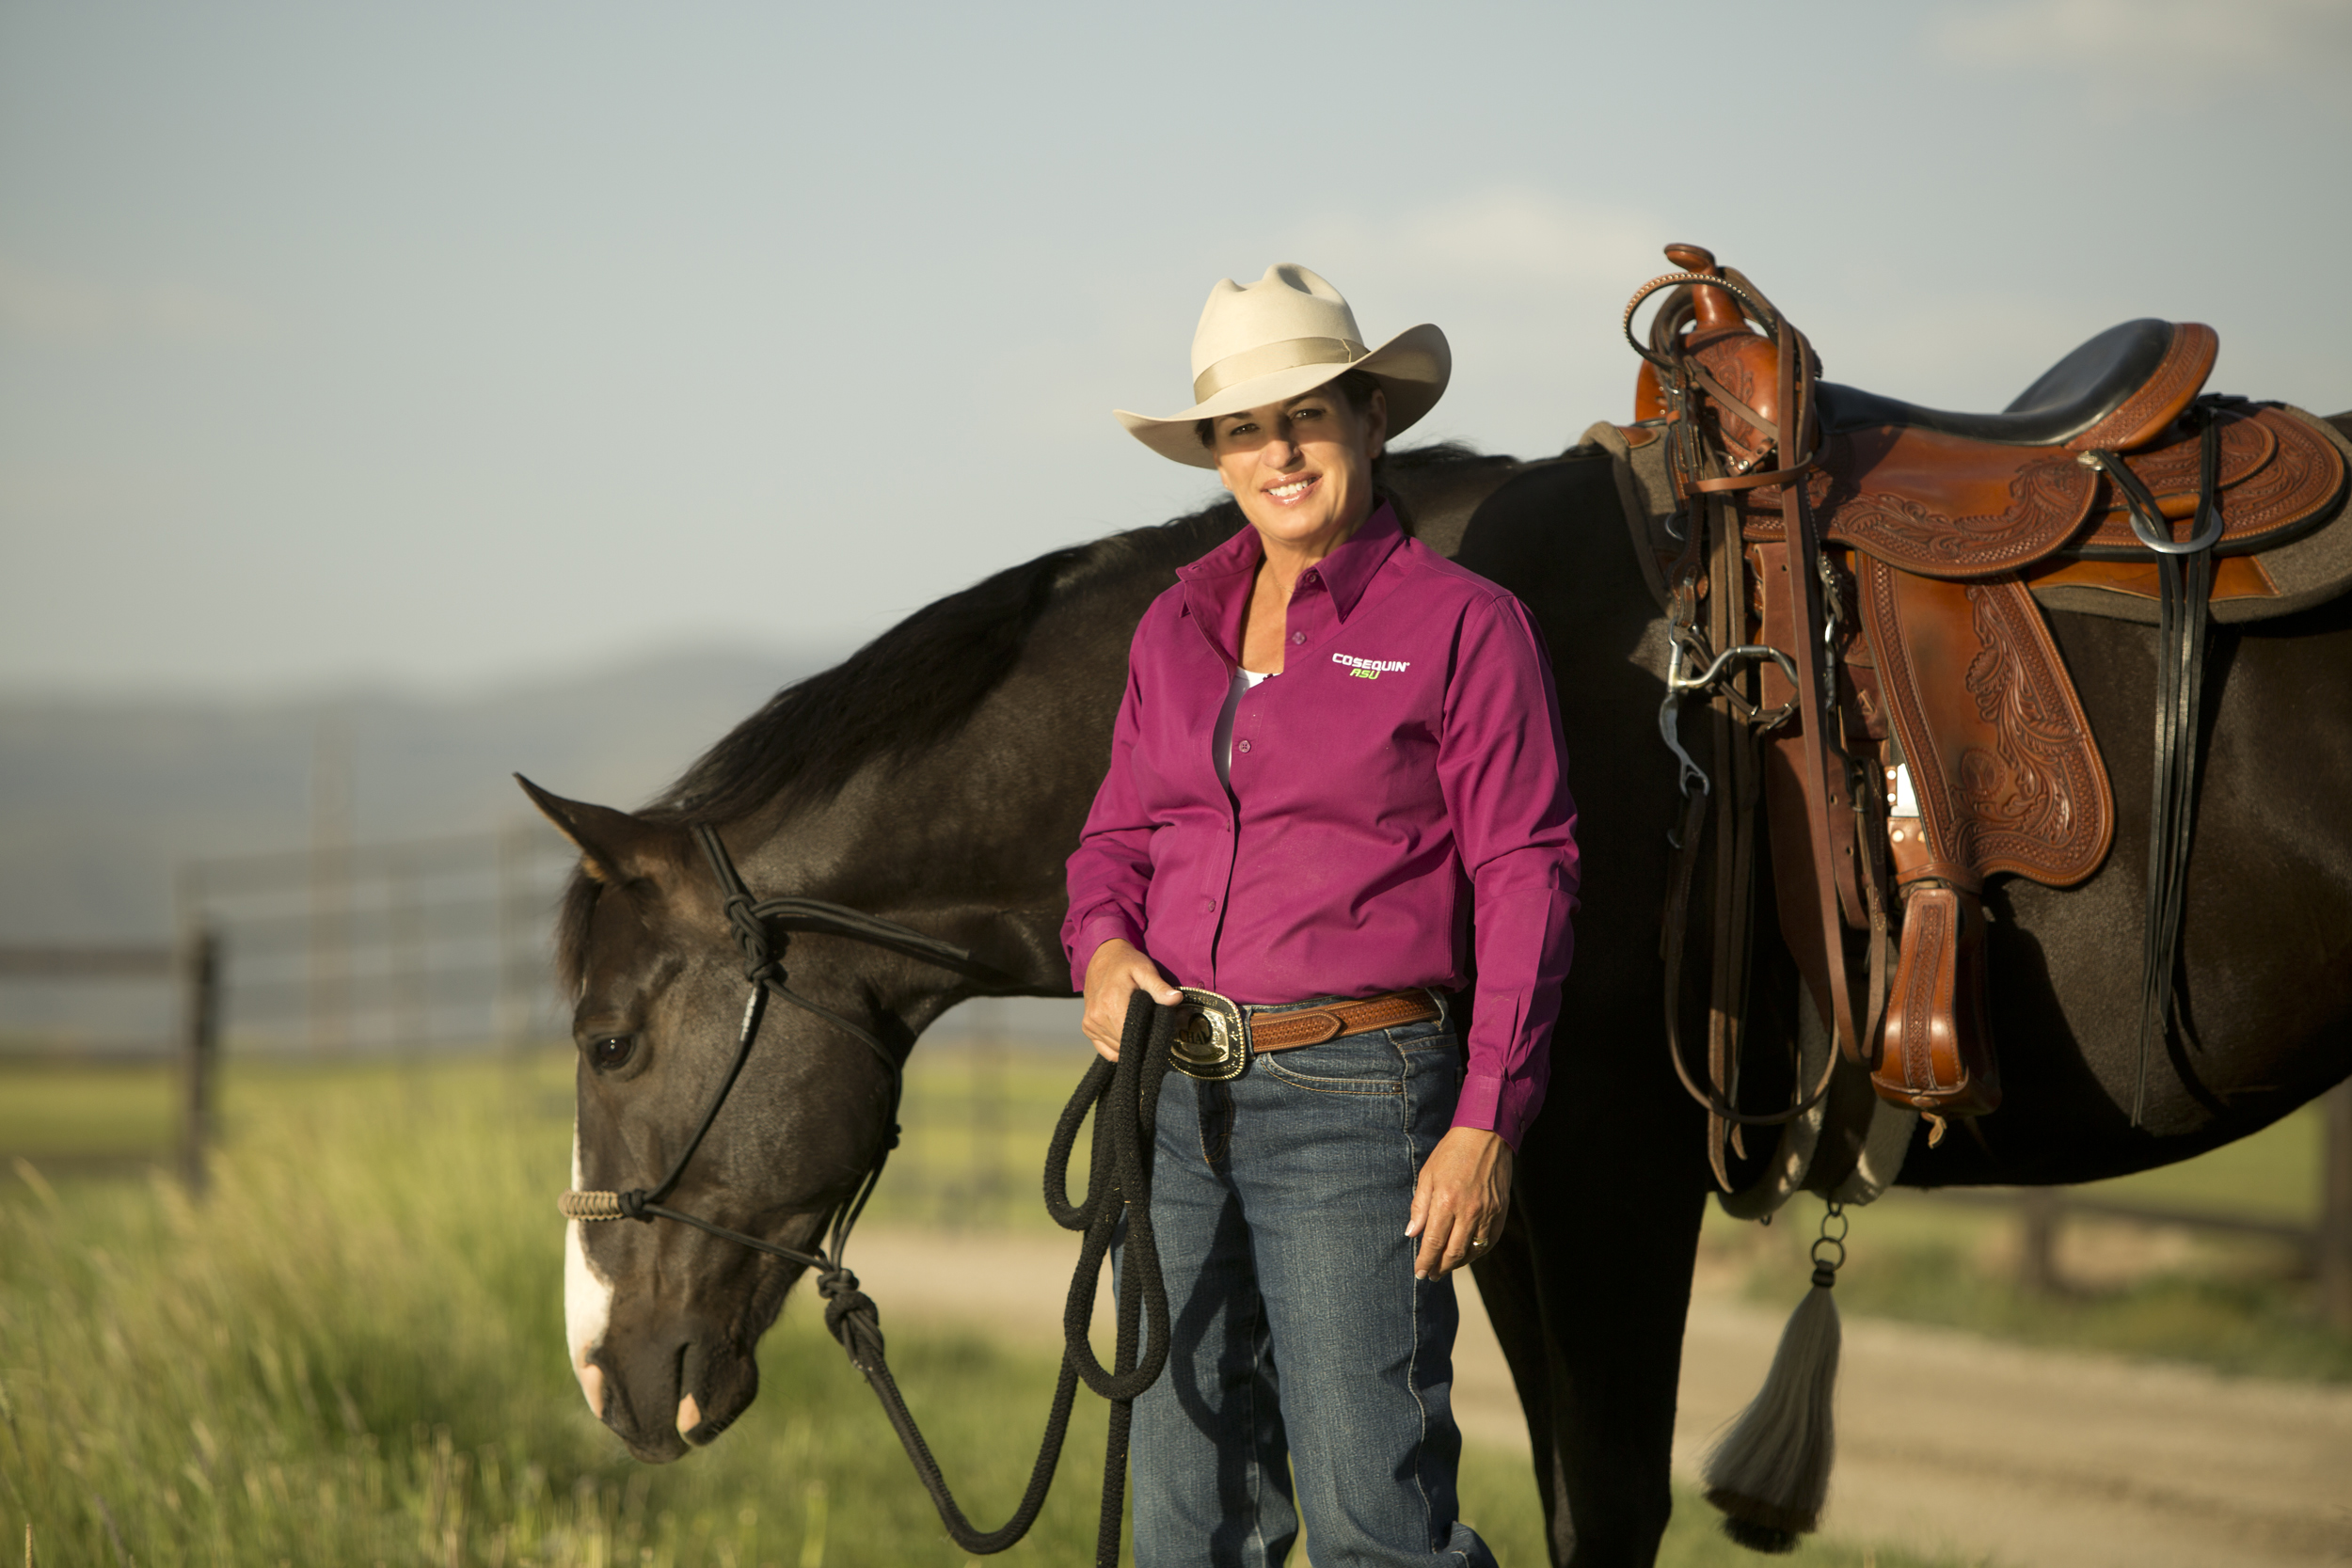 Julie Goodnight and Barbra Schulte Partner Up for Women’s Riding and Wholeness Retreat at C Lazy U Ranch